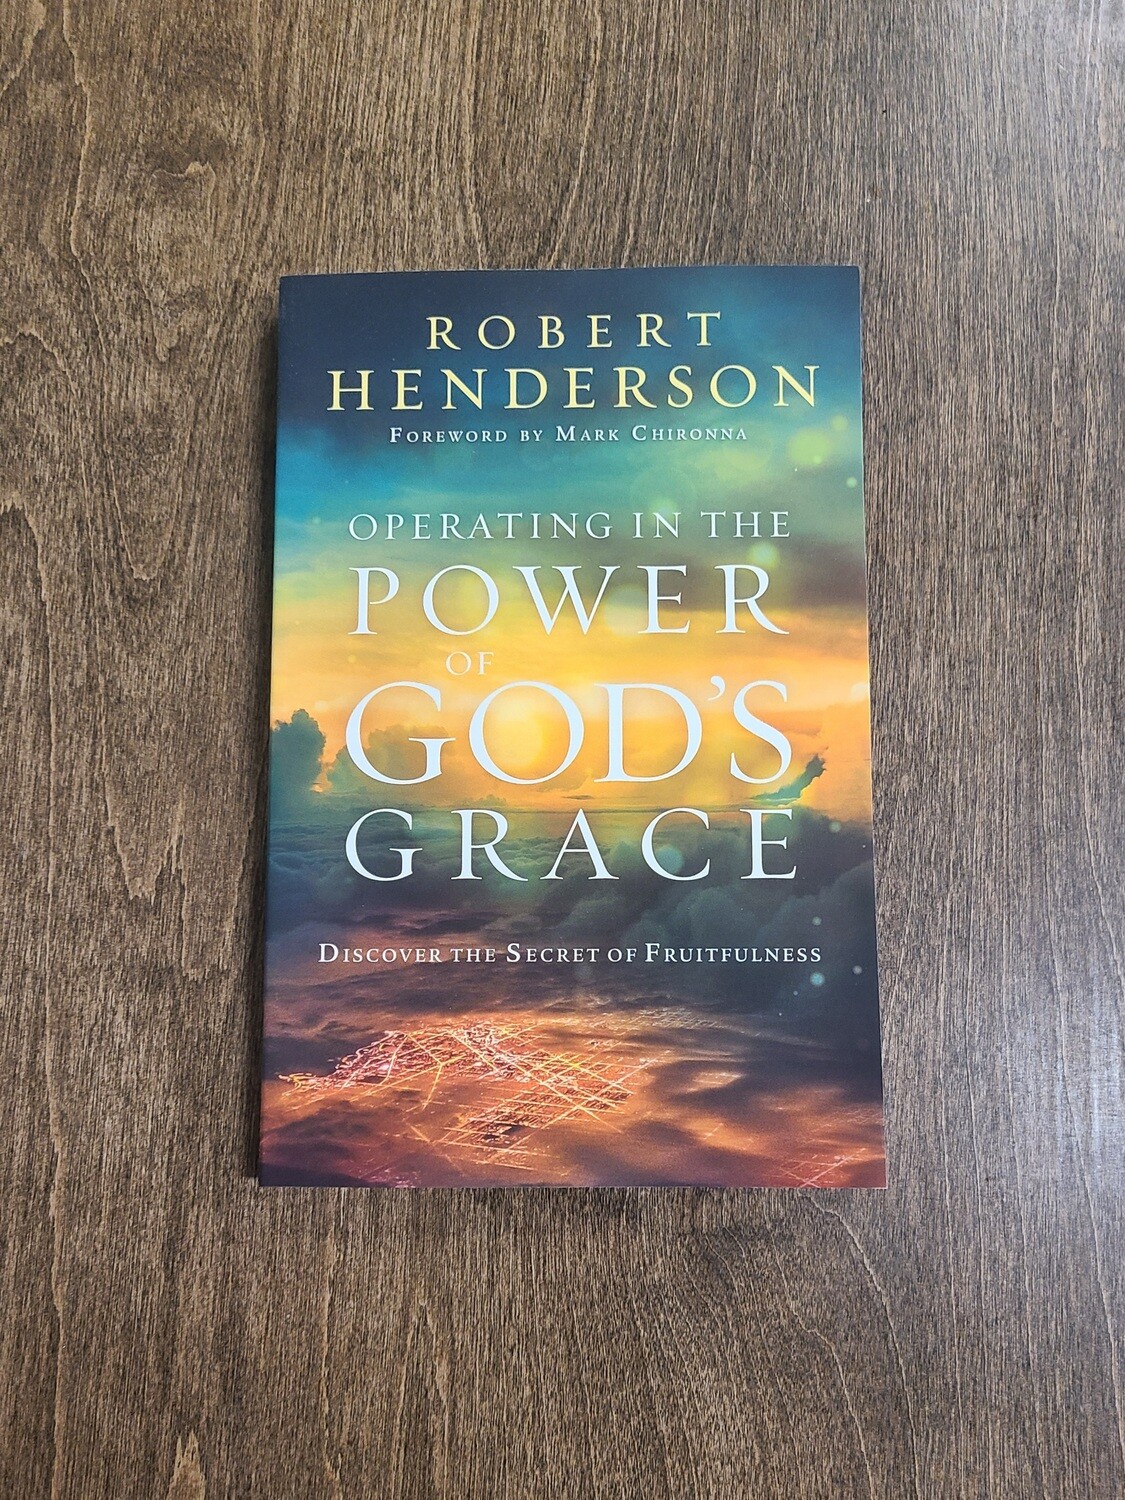 Operating in the Power of God's Grace: Discover the Secret of Fruitfulness by Robert Henderson